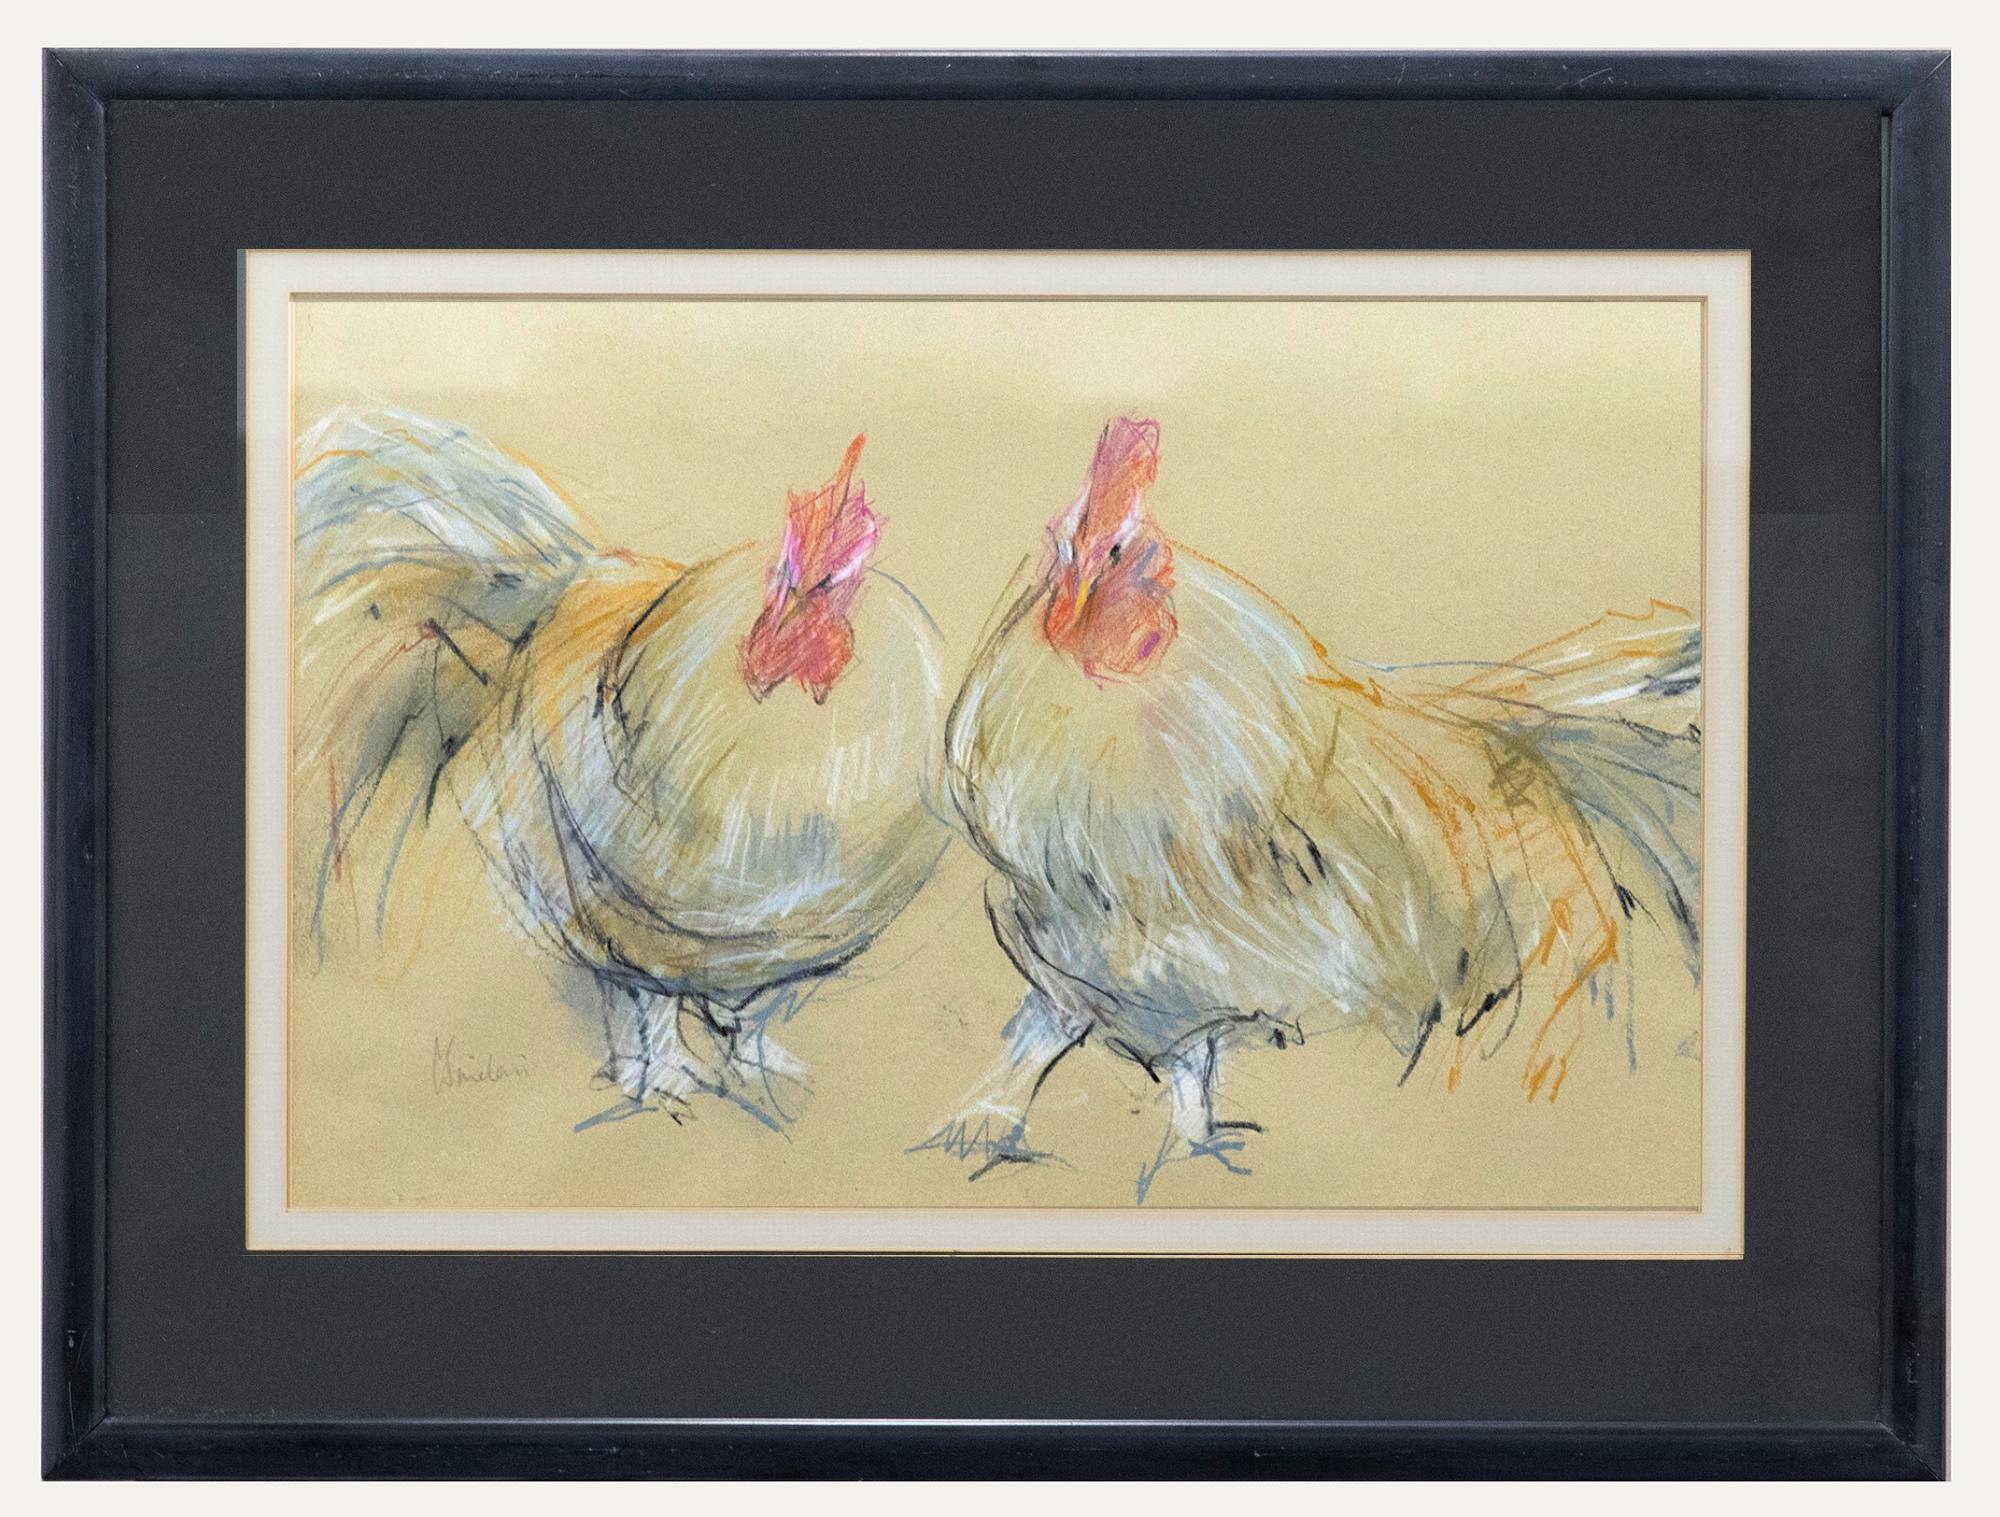 Unknown Animal Art - C. Sinclair - Framed Contemporary Pastel, Clucking Cockerels